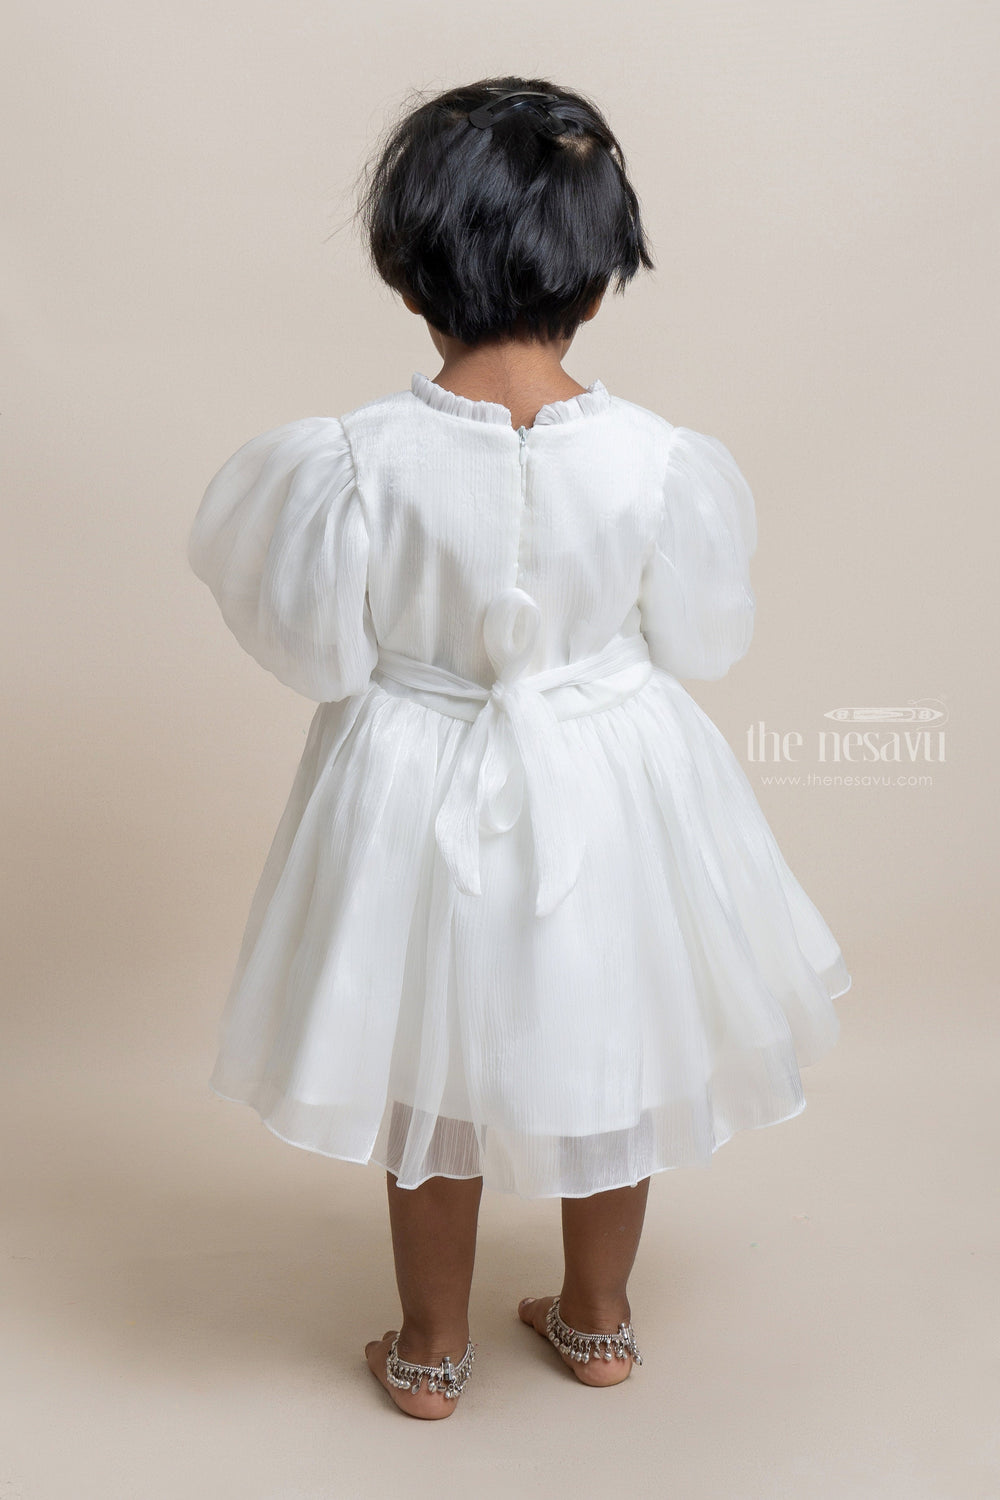 The Nesavu Girls Fancy Party Frock Cutest White Glaze Organza Puffed Sleeve Solid Party Frock For Girls Nesavu Glamorous party frocks | Elegant party frocks | The Nesavu